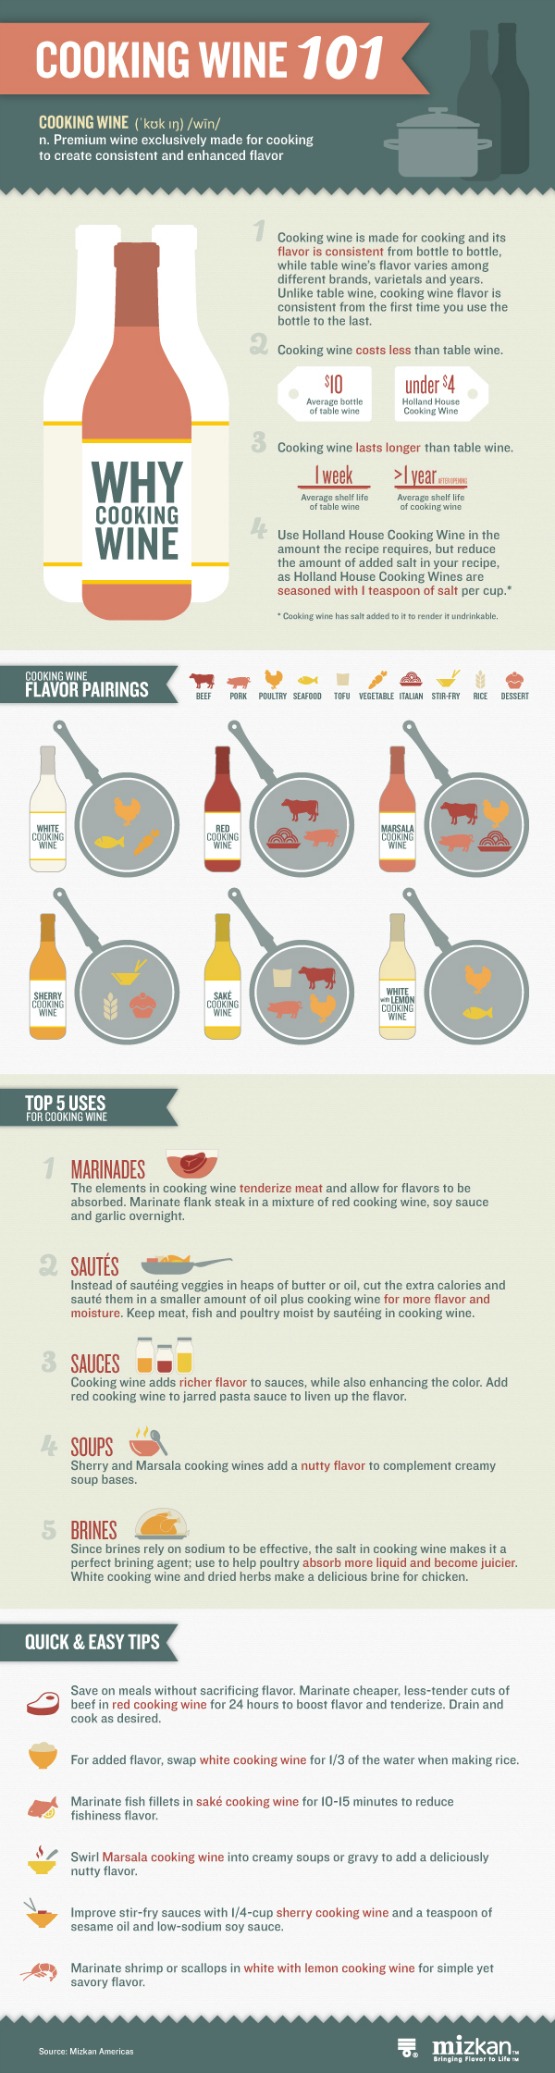 Using cooking wine